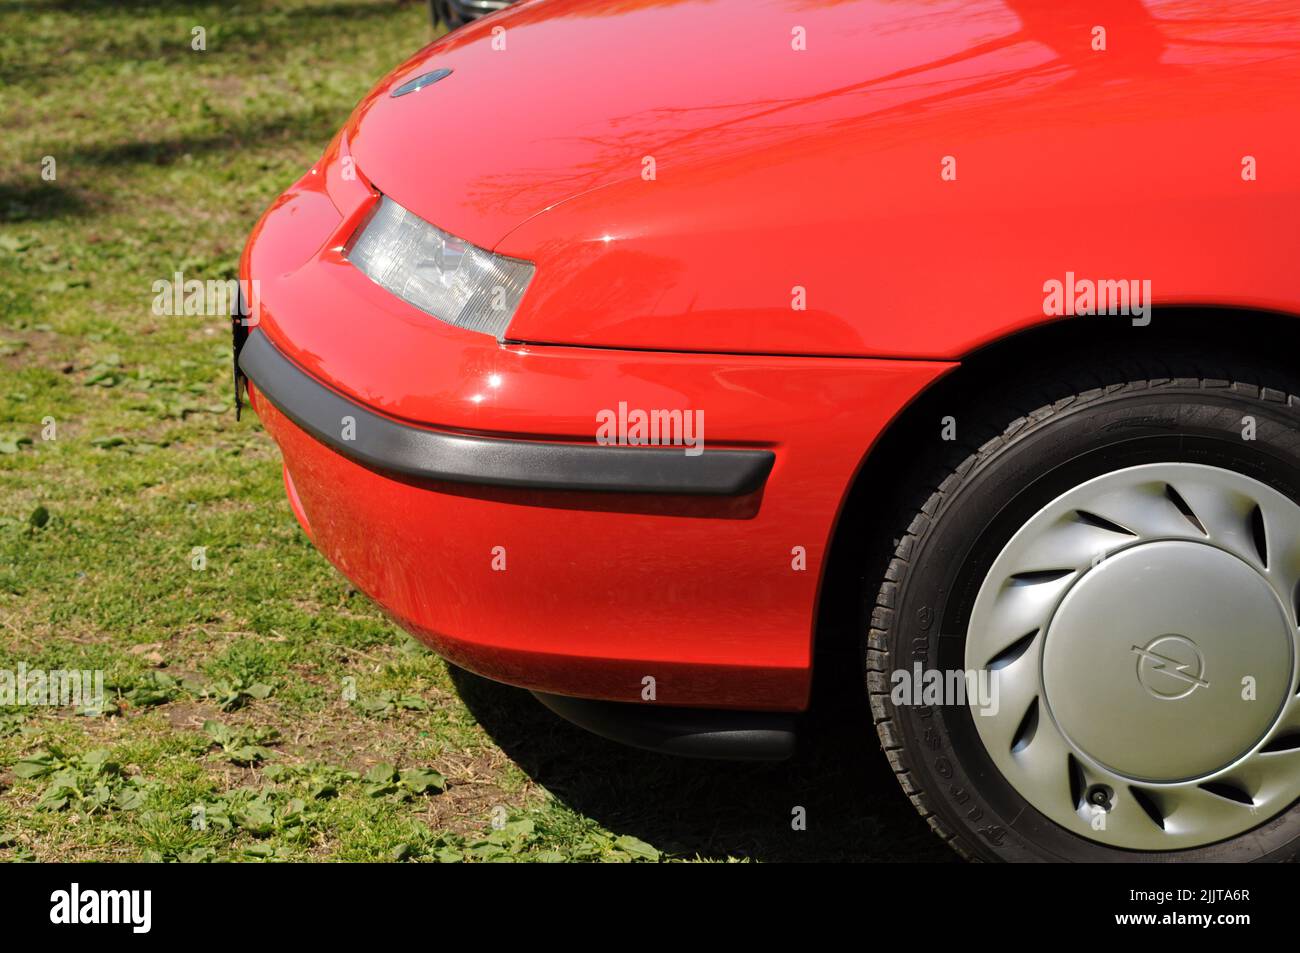 An old red Opel Calibra on display at a car show Stock Photo